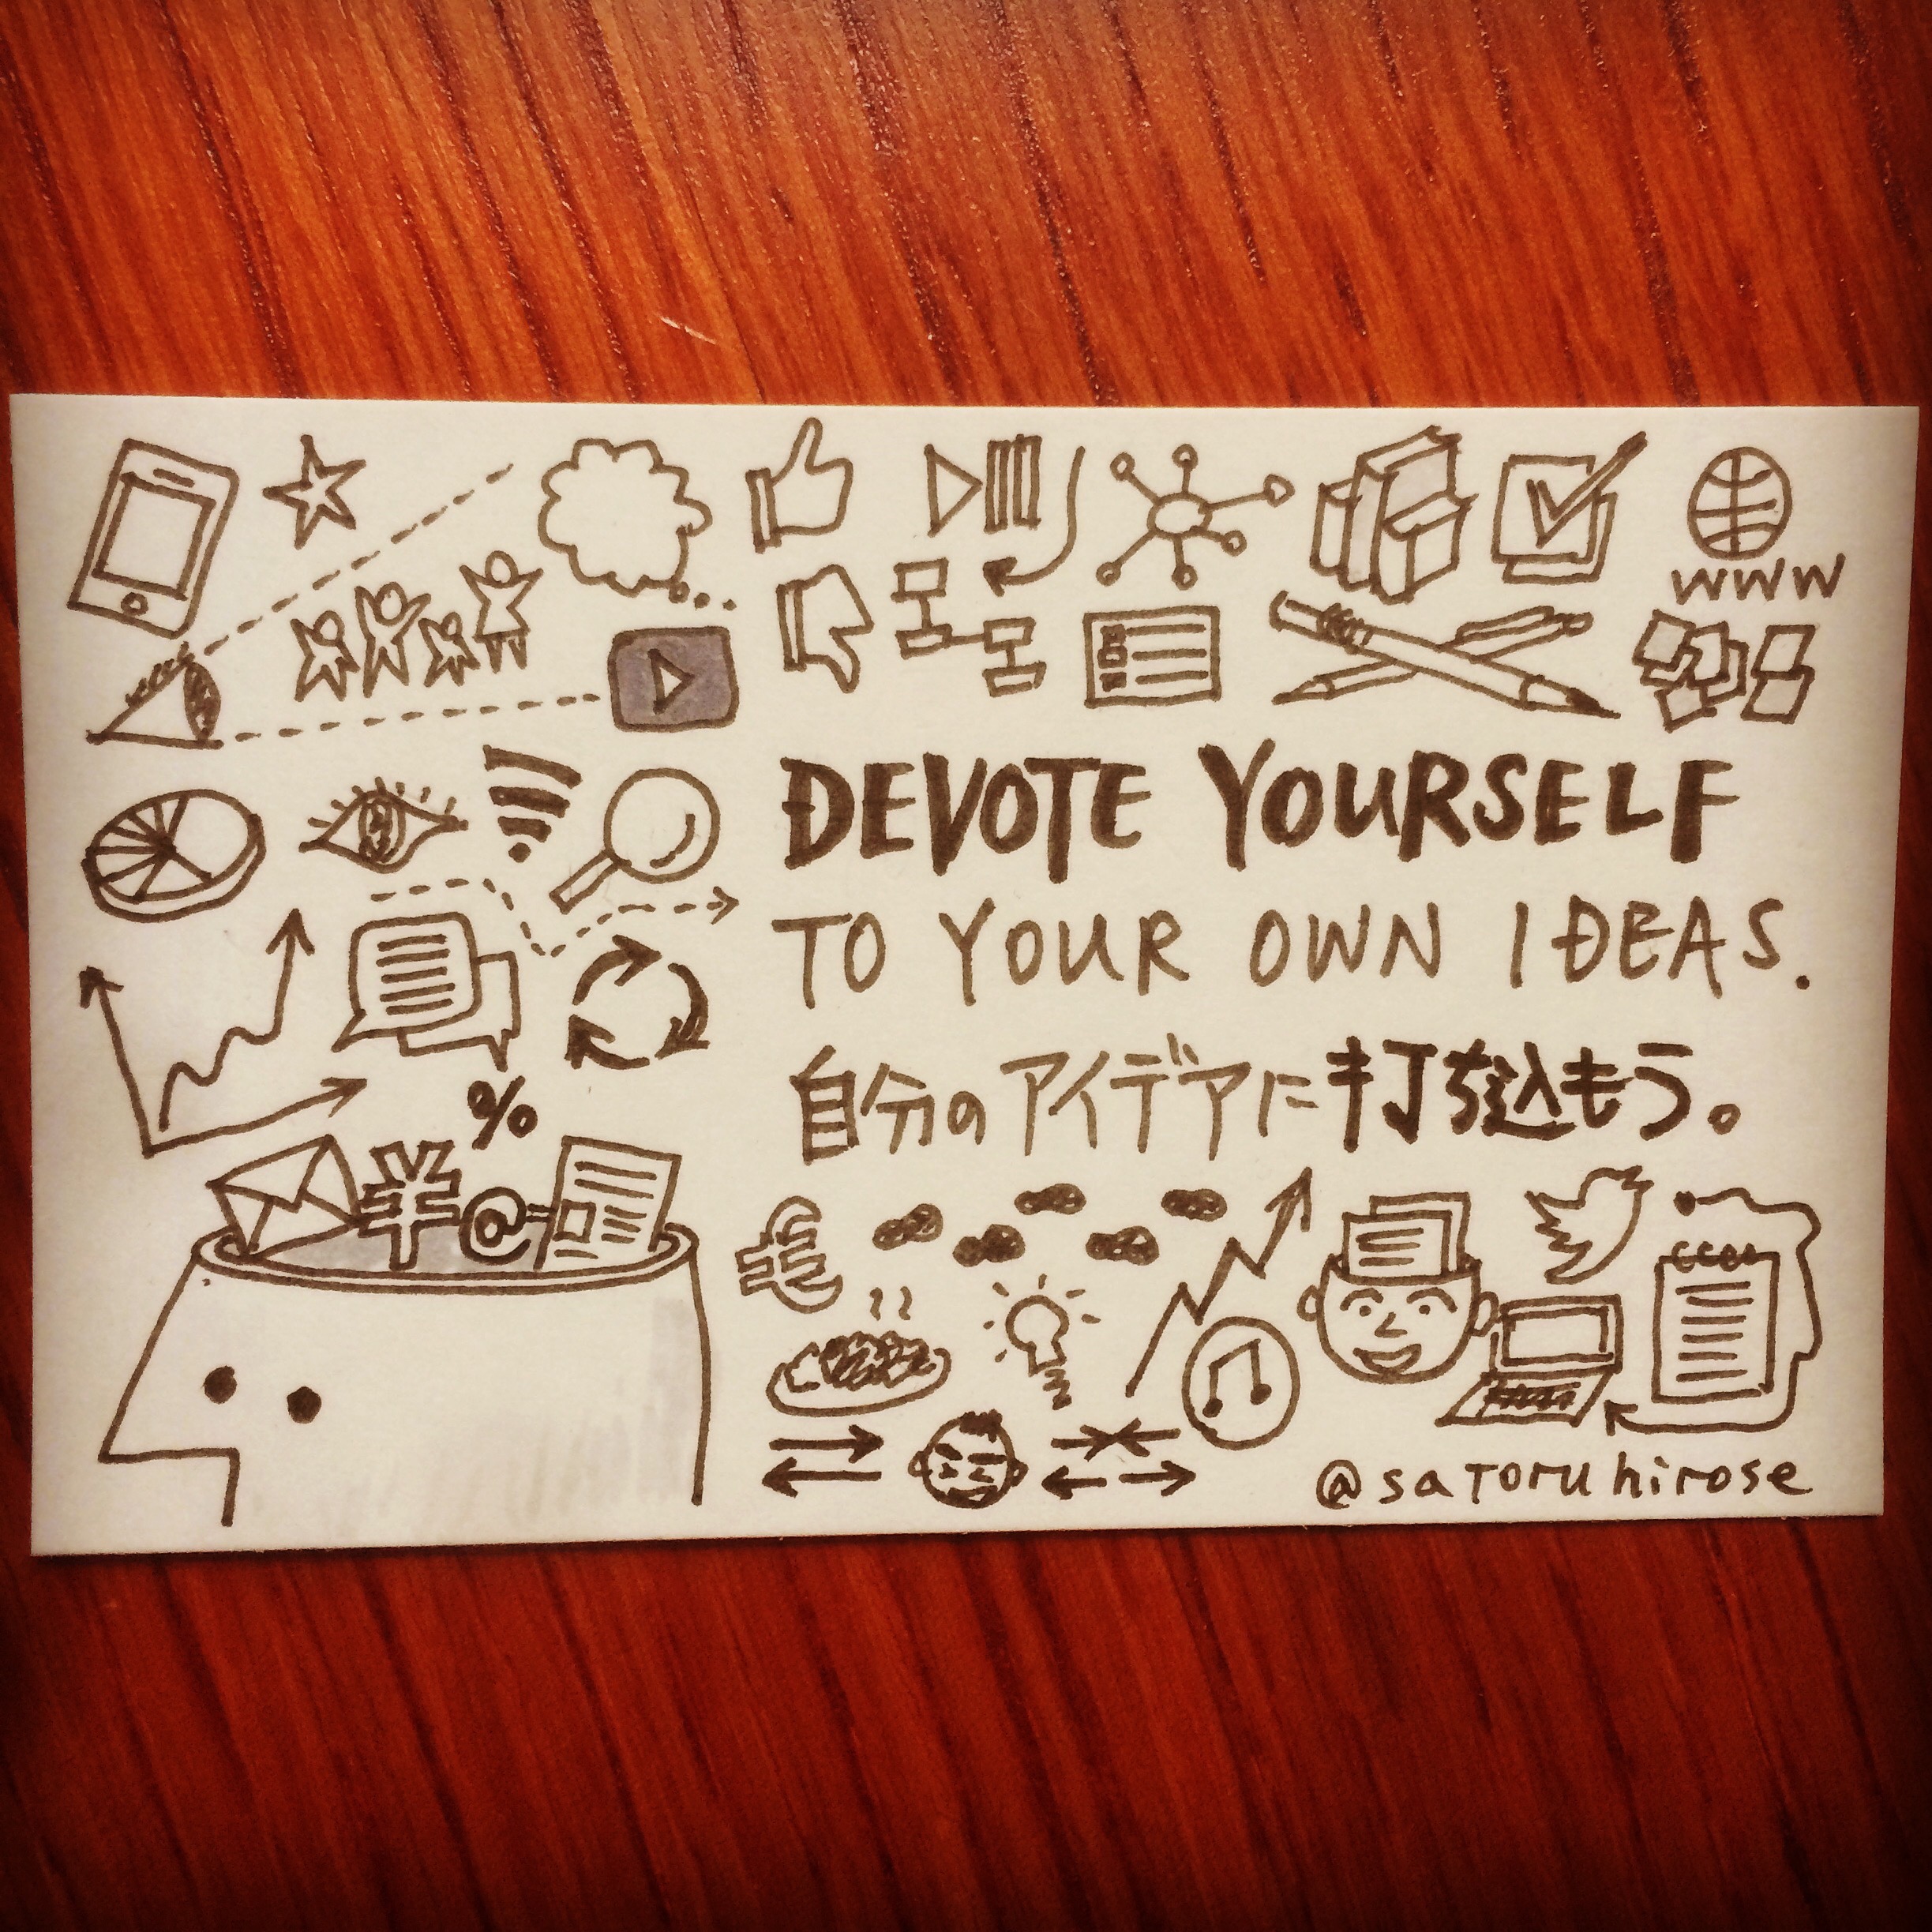 Devote yourself to your own ideas.